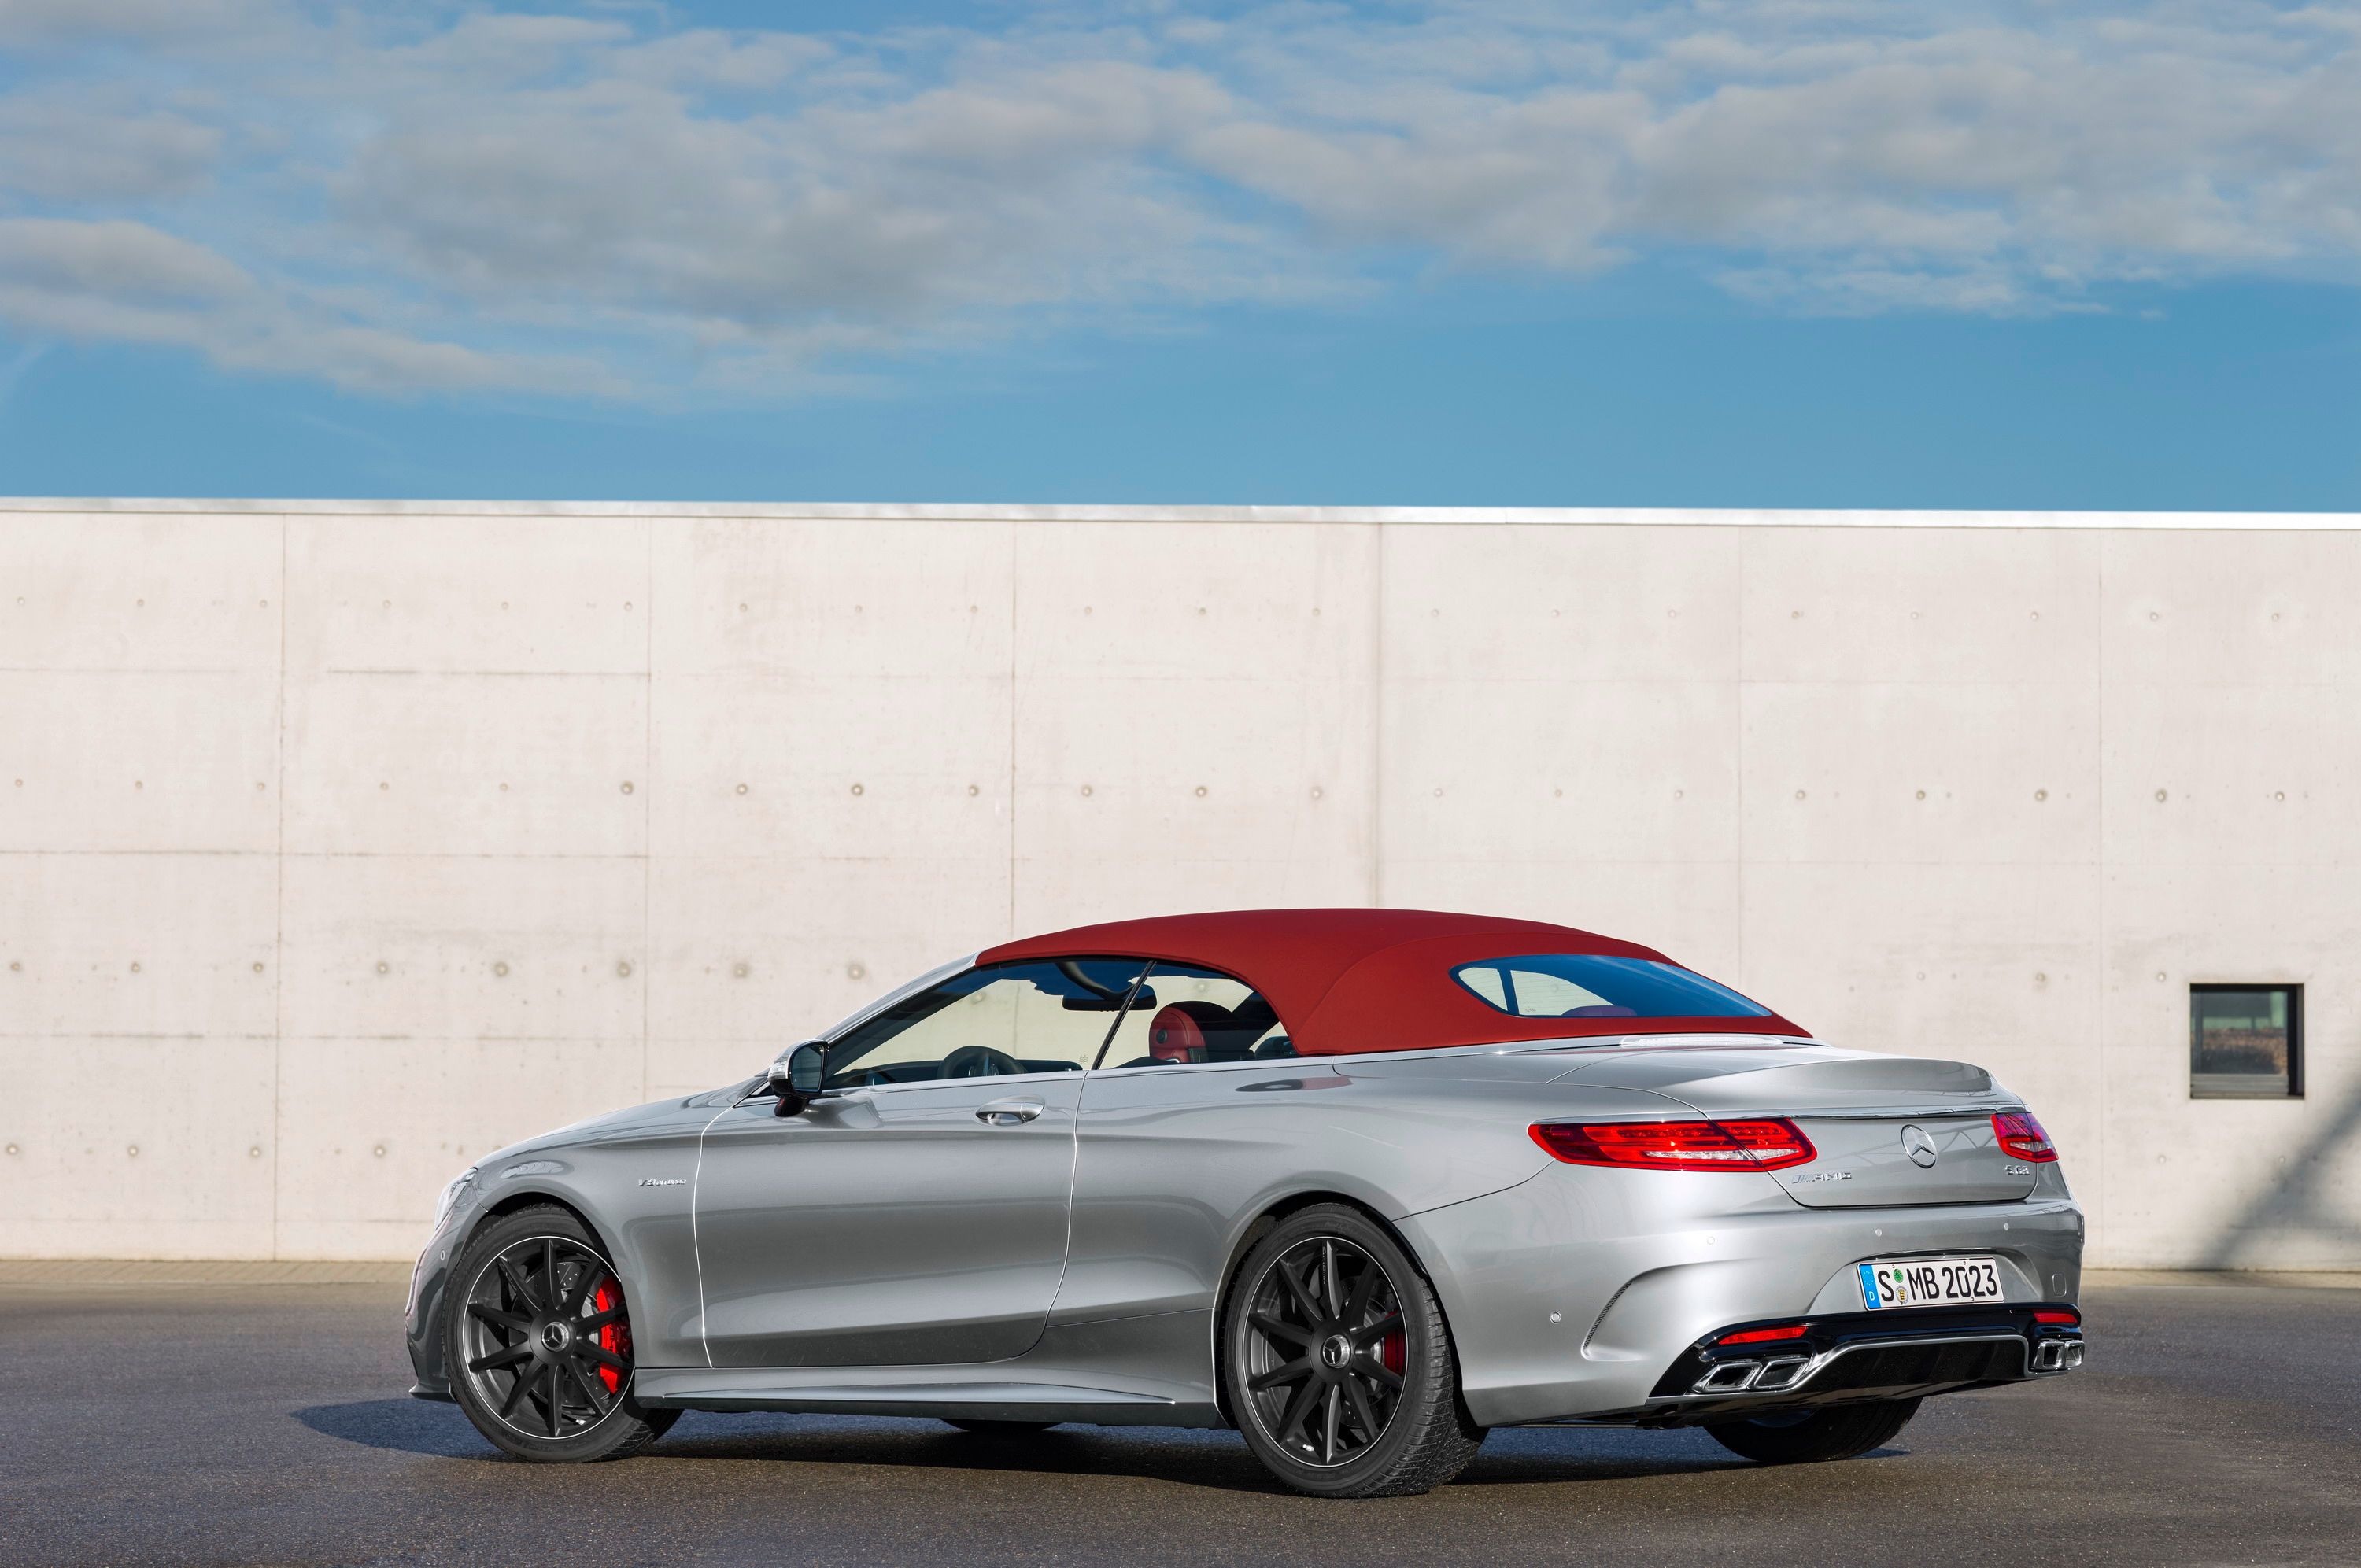 2017 Mercedes-AMG S 63 4MATIC Cabriolet 